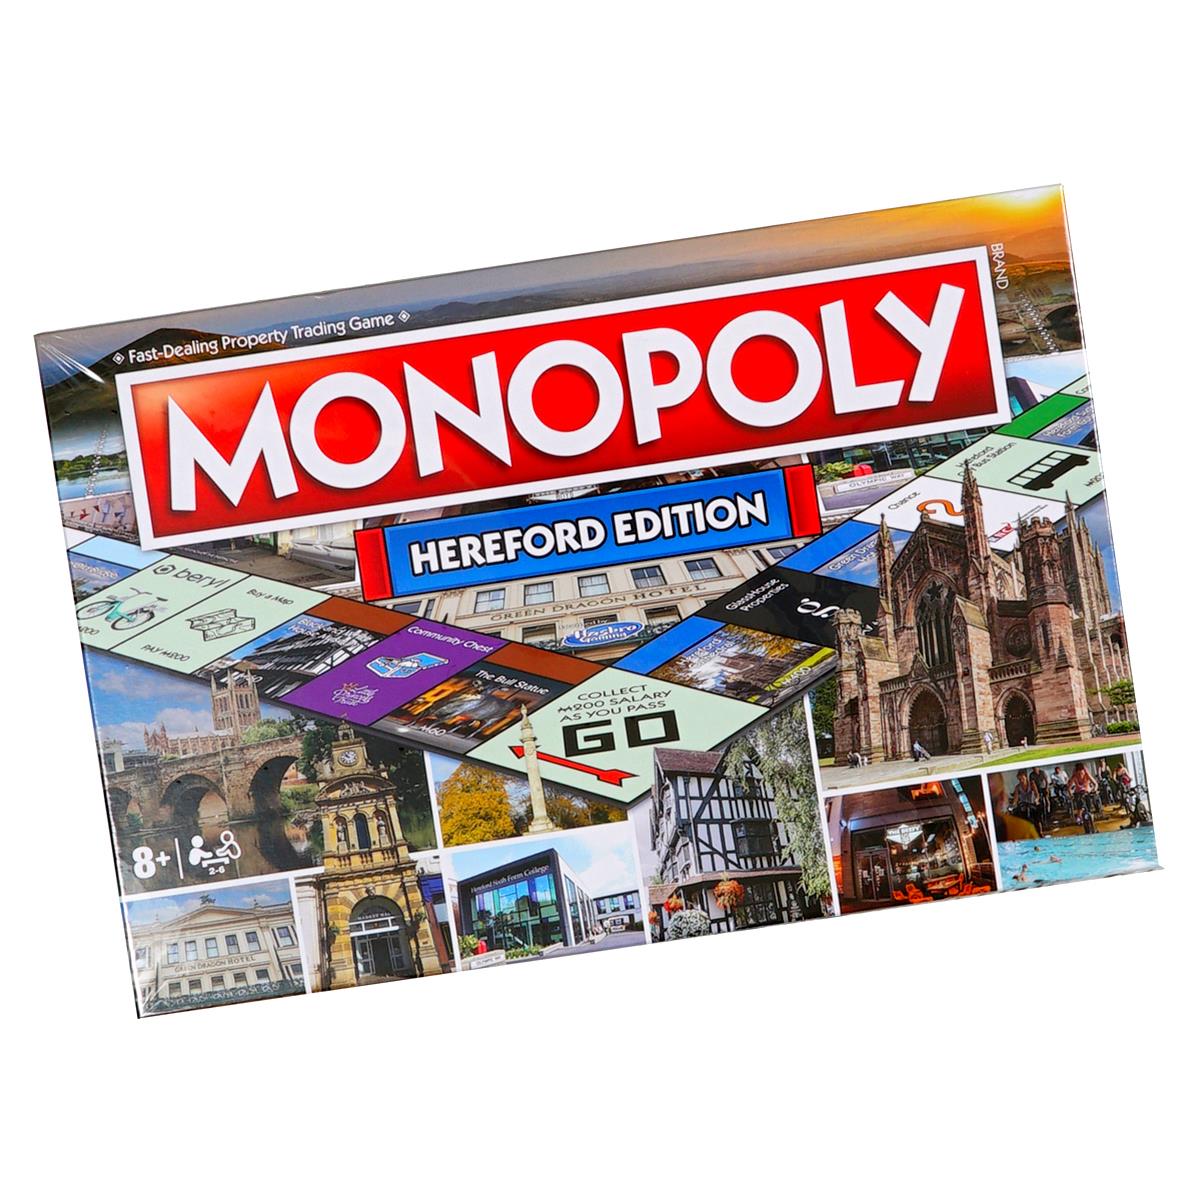 Is Hereford included in this special edition of Monopoly Hereford?